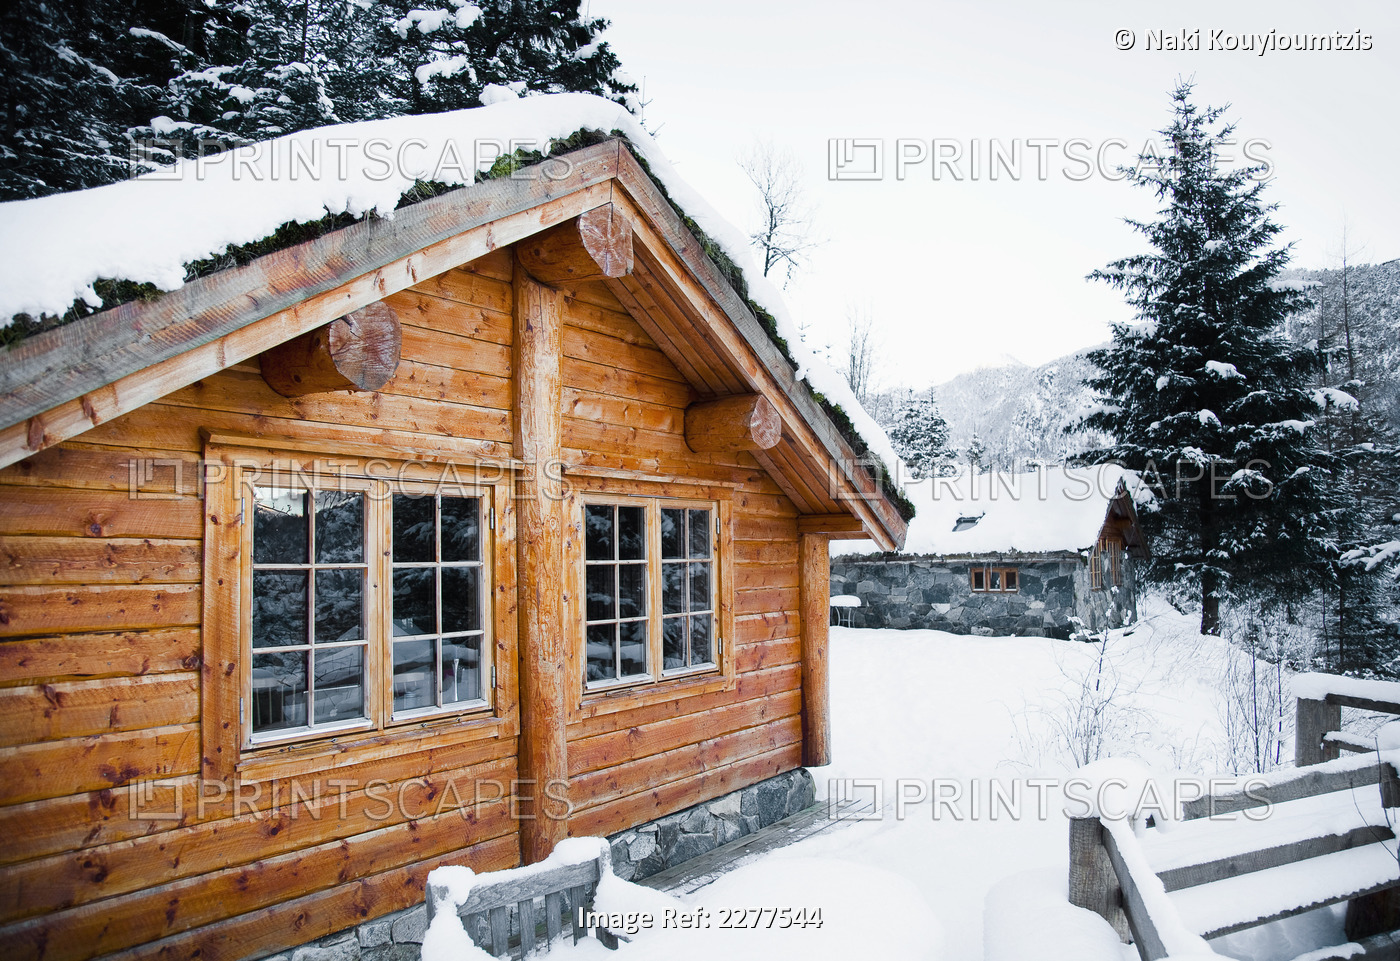 Winter Alpine Scenery With Mountains, Snow And A Pine Forest With Brekke Rental ...